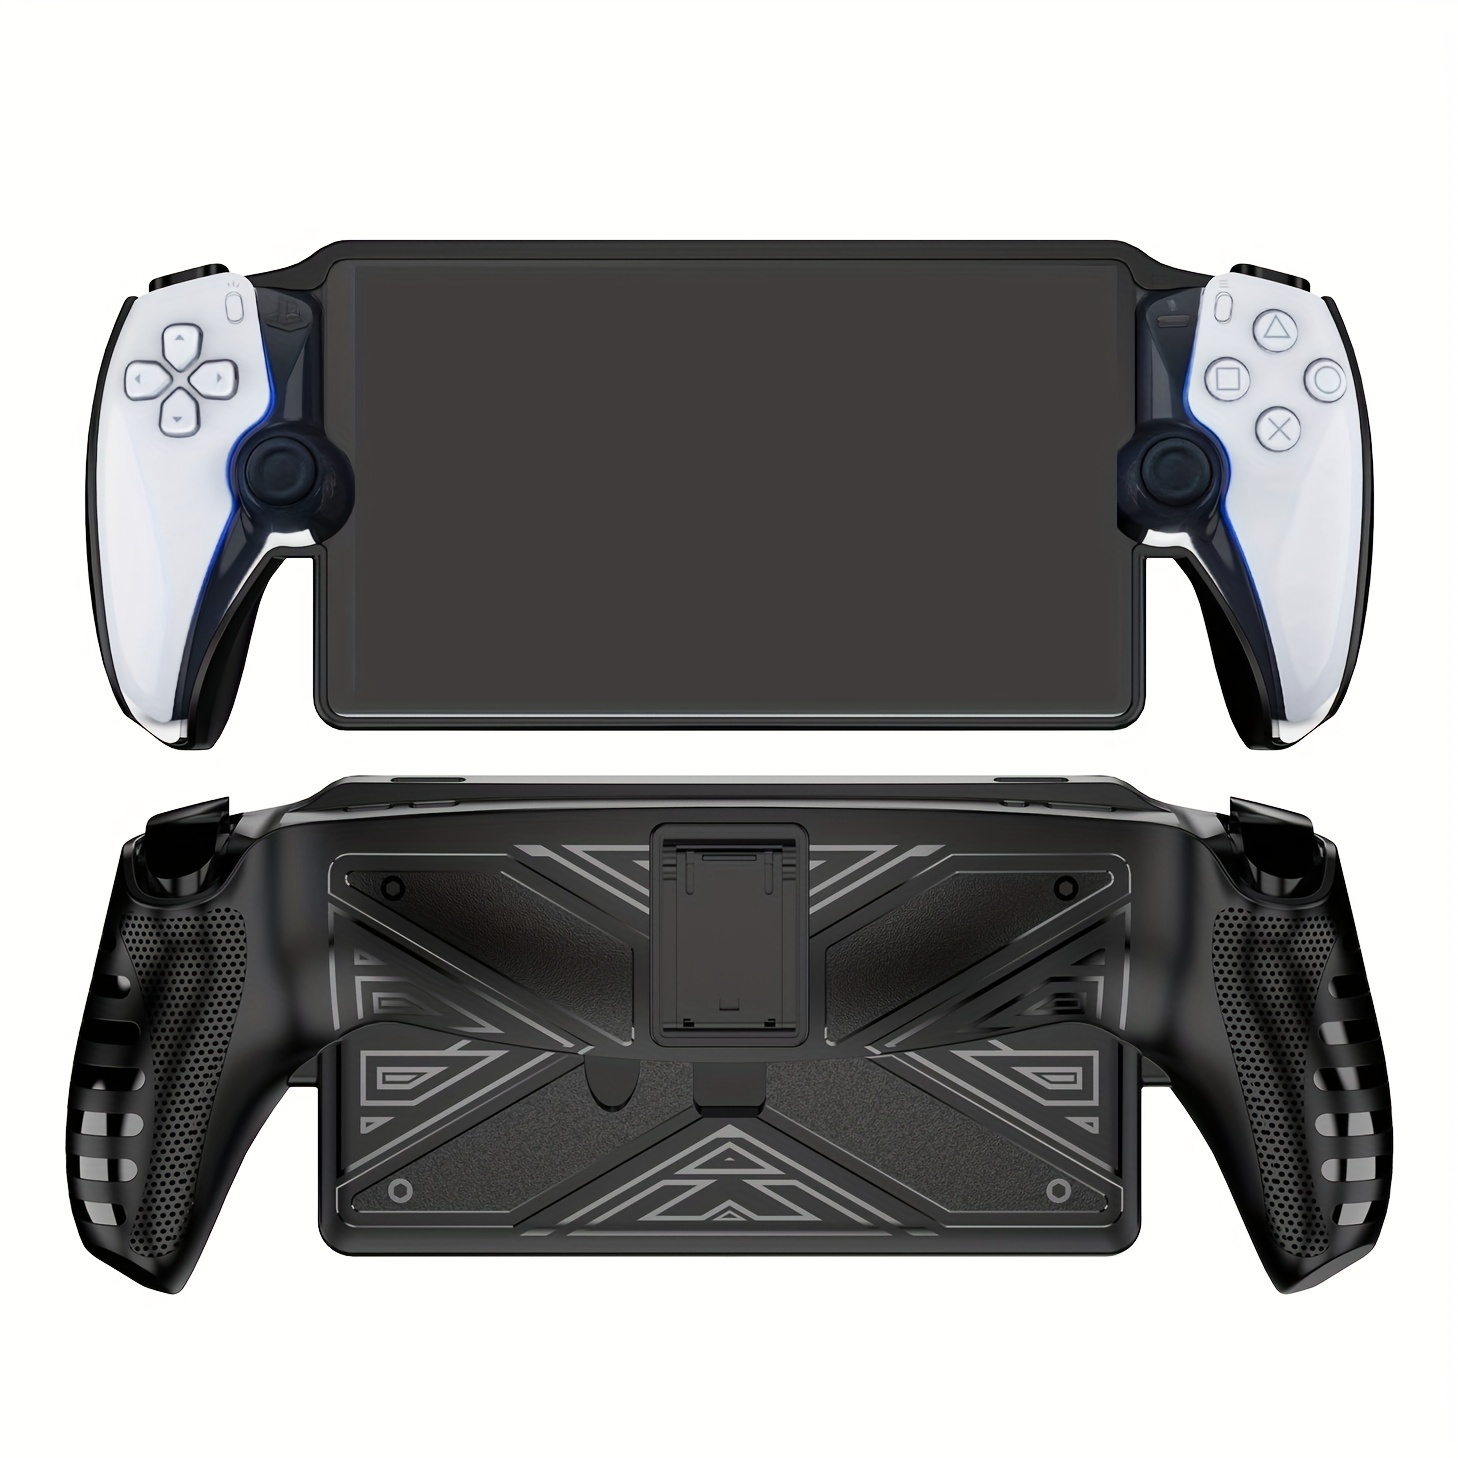 Protective Case Cover for Sony Playstation Portal,with Stand,TPU Gaming  Console Controller Sleeve Skin,Game Machine Grip Shell  Case,Shock-Absorption